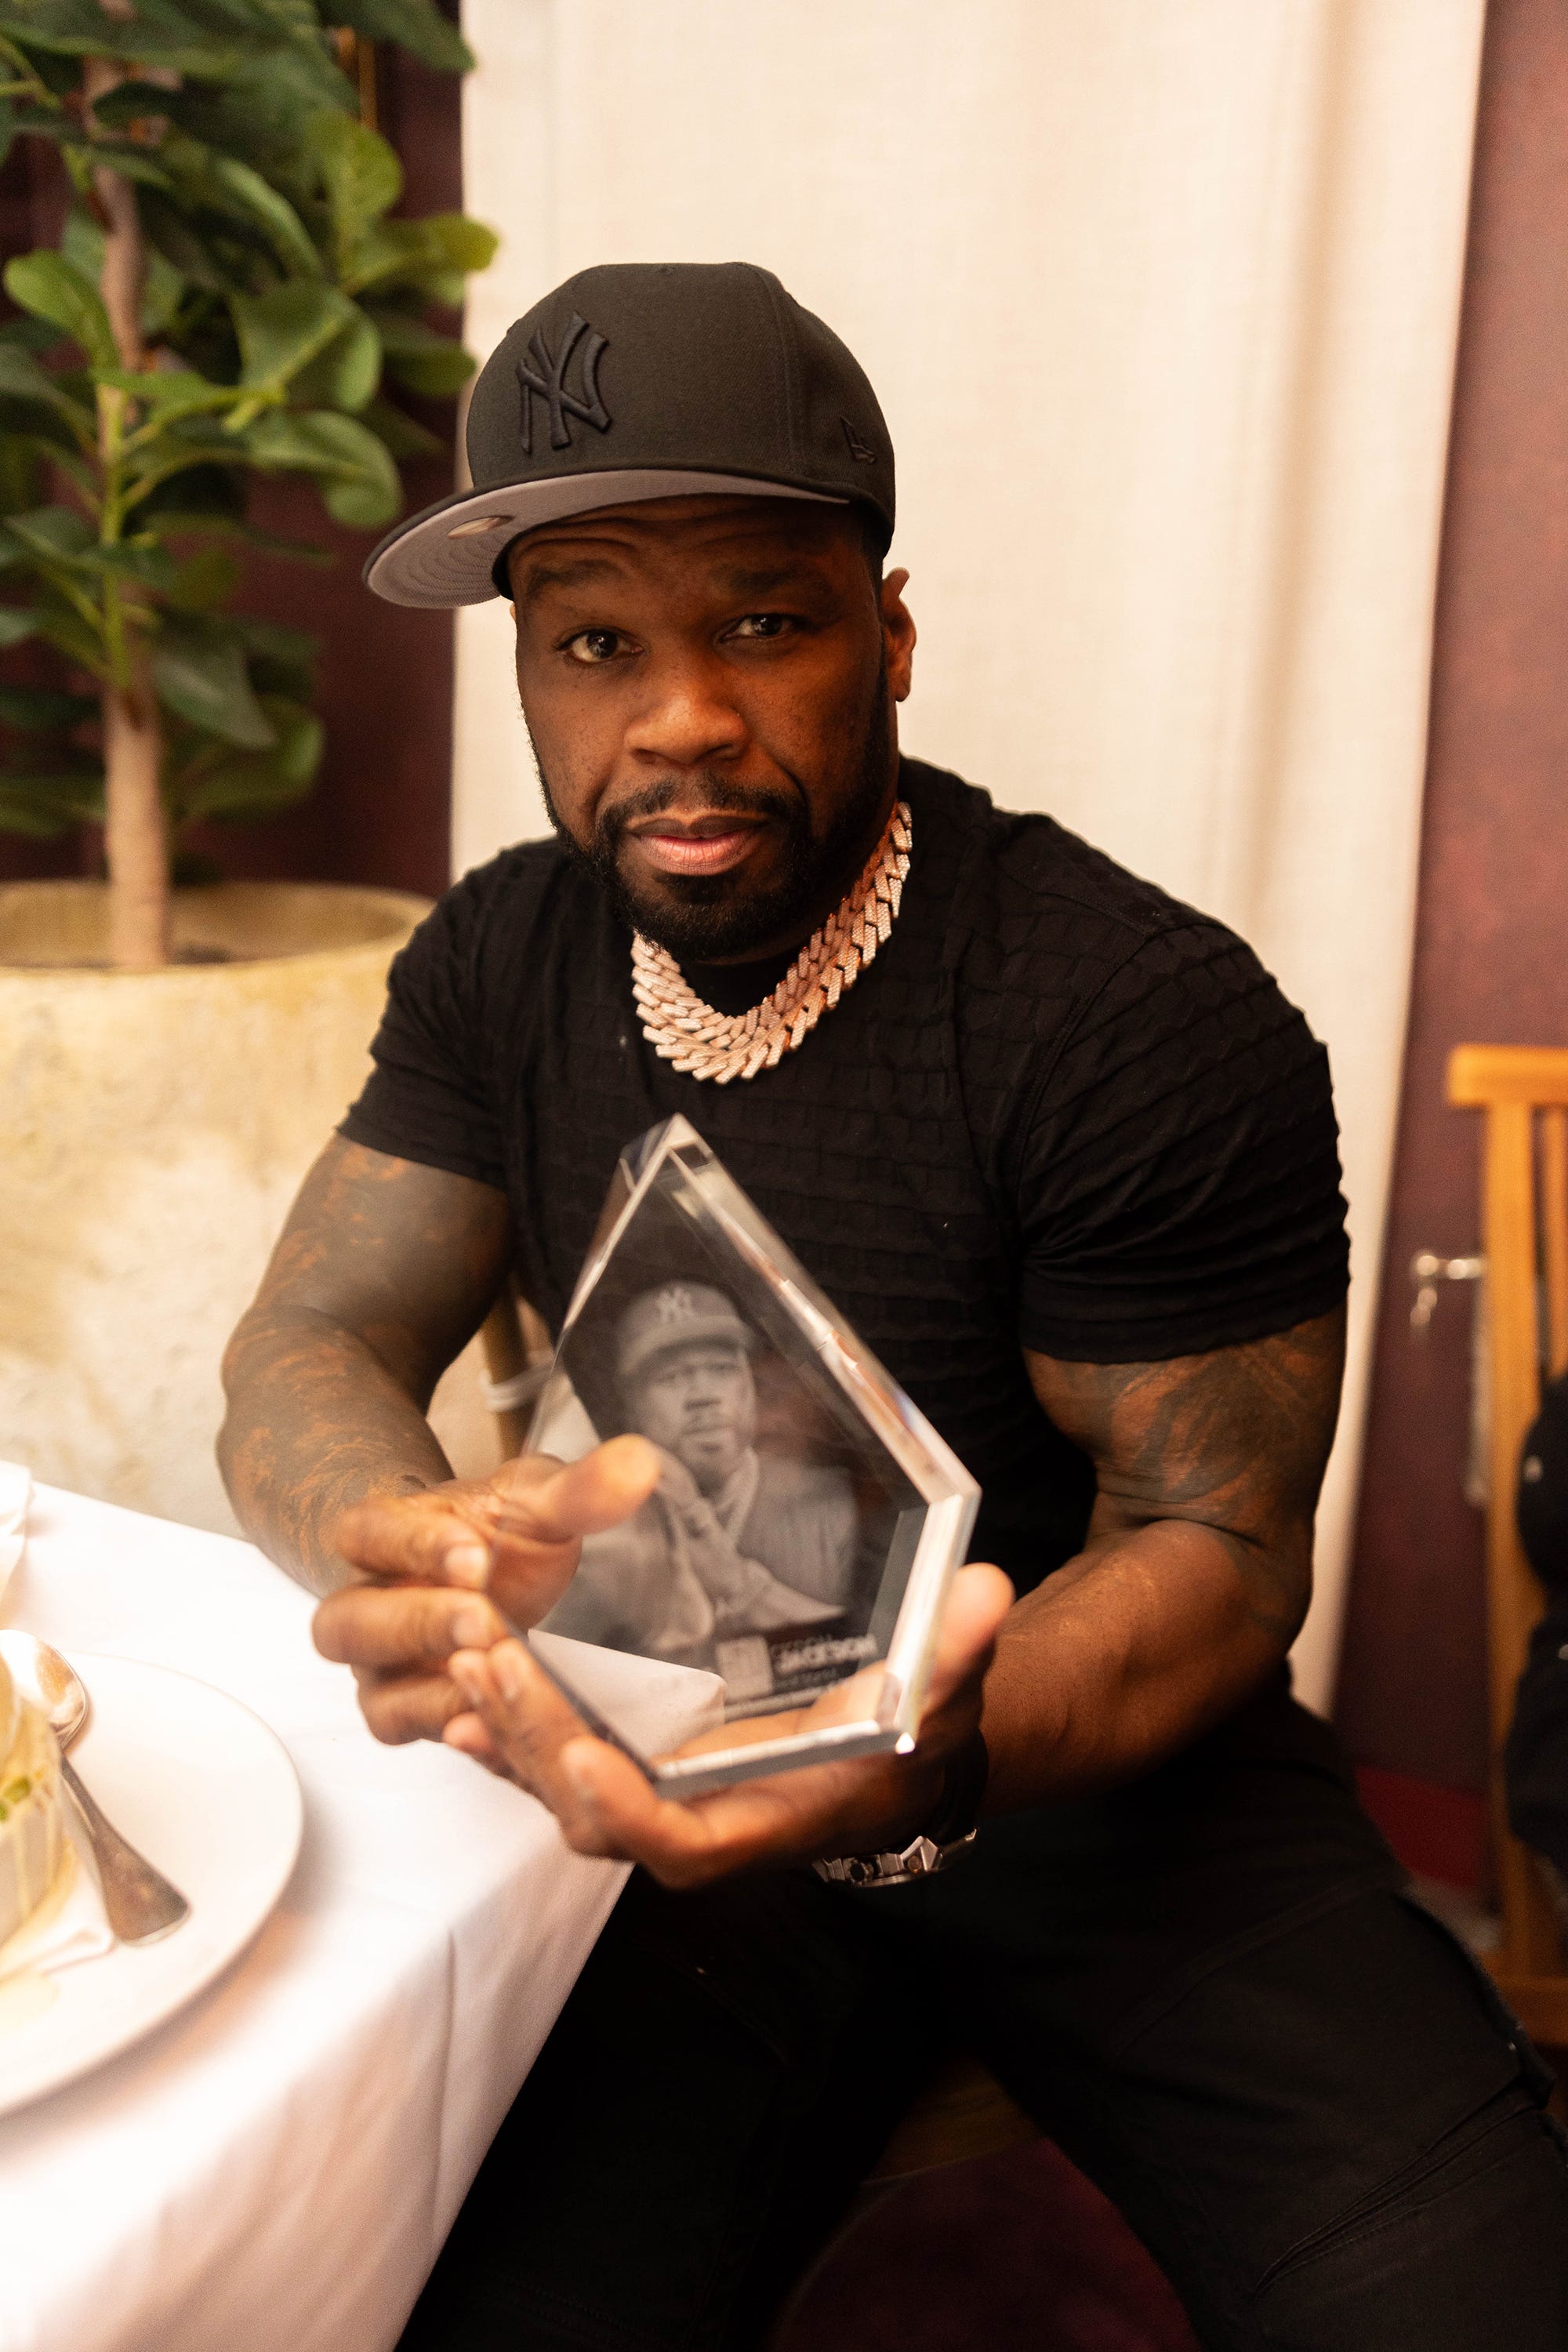 50 Cent Says He's 'Practicing Abstinence' to 'Focus on His Goals